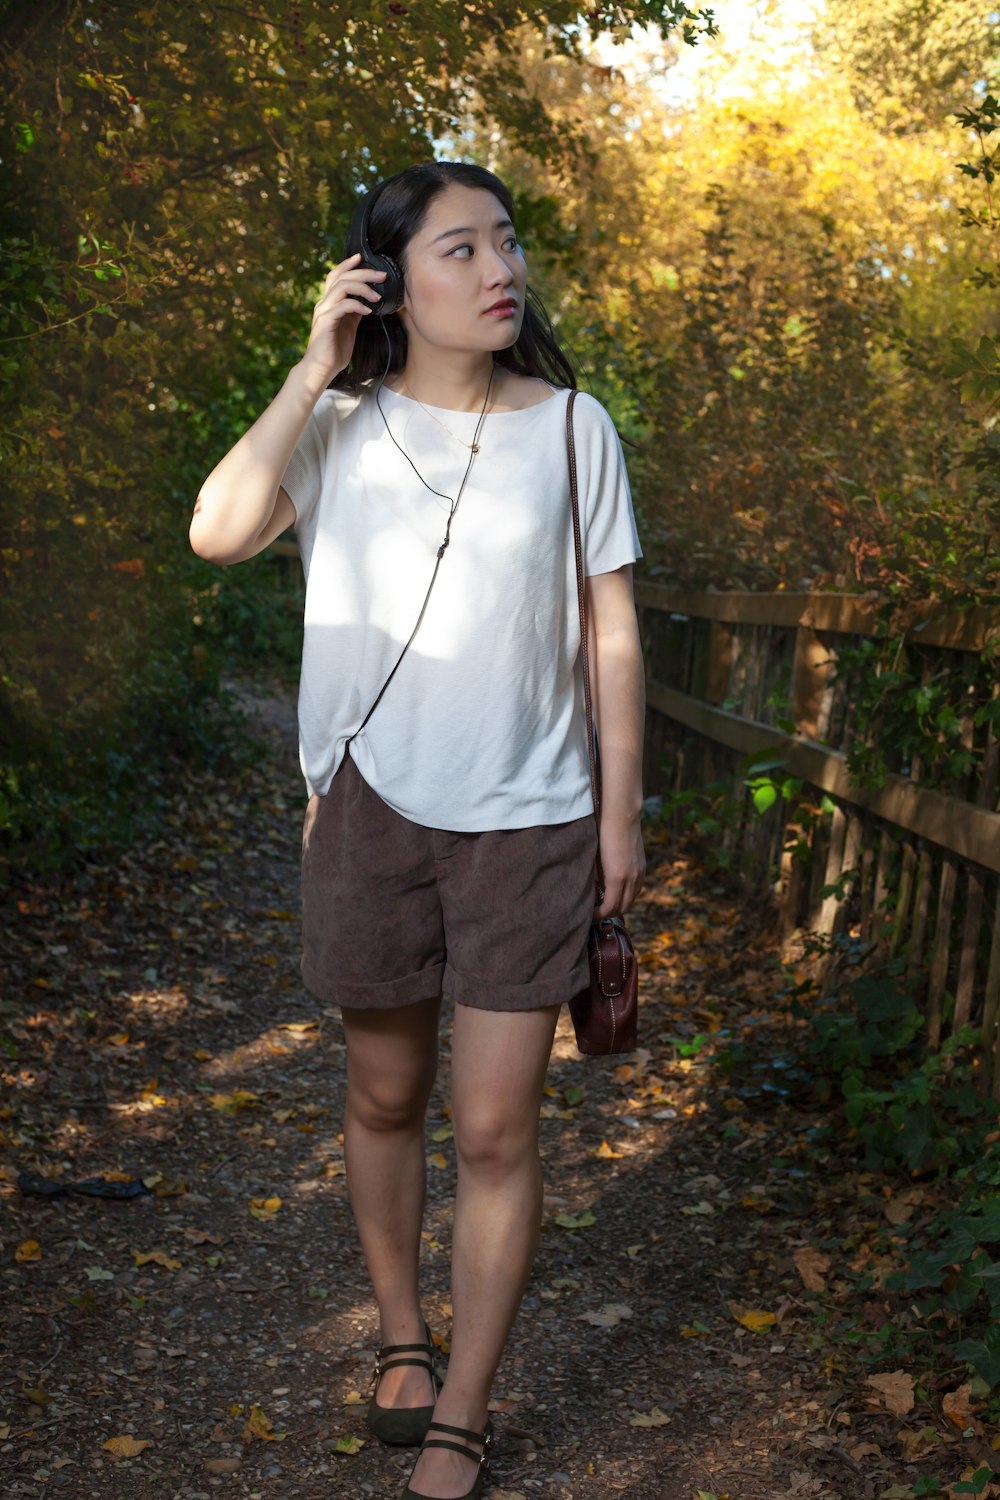 woman in white shirt and brown shorts standing on pathway